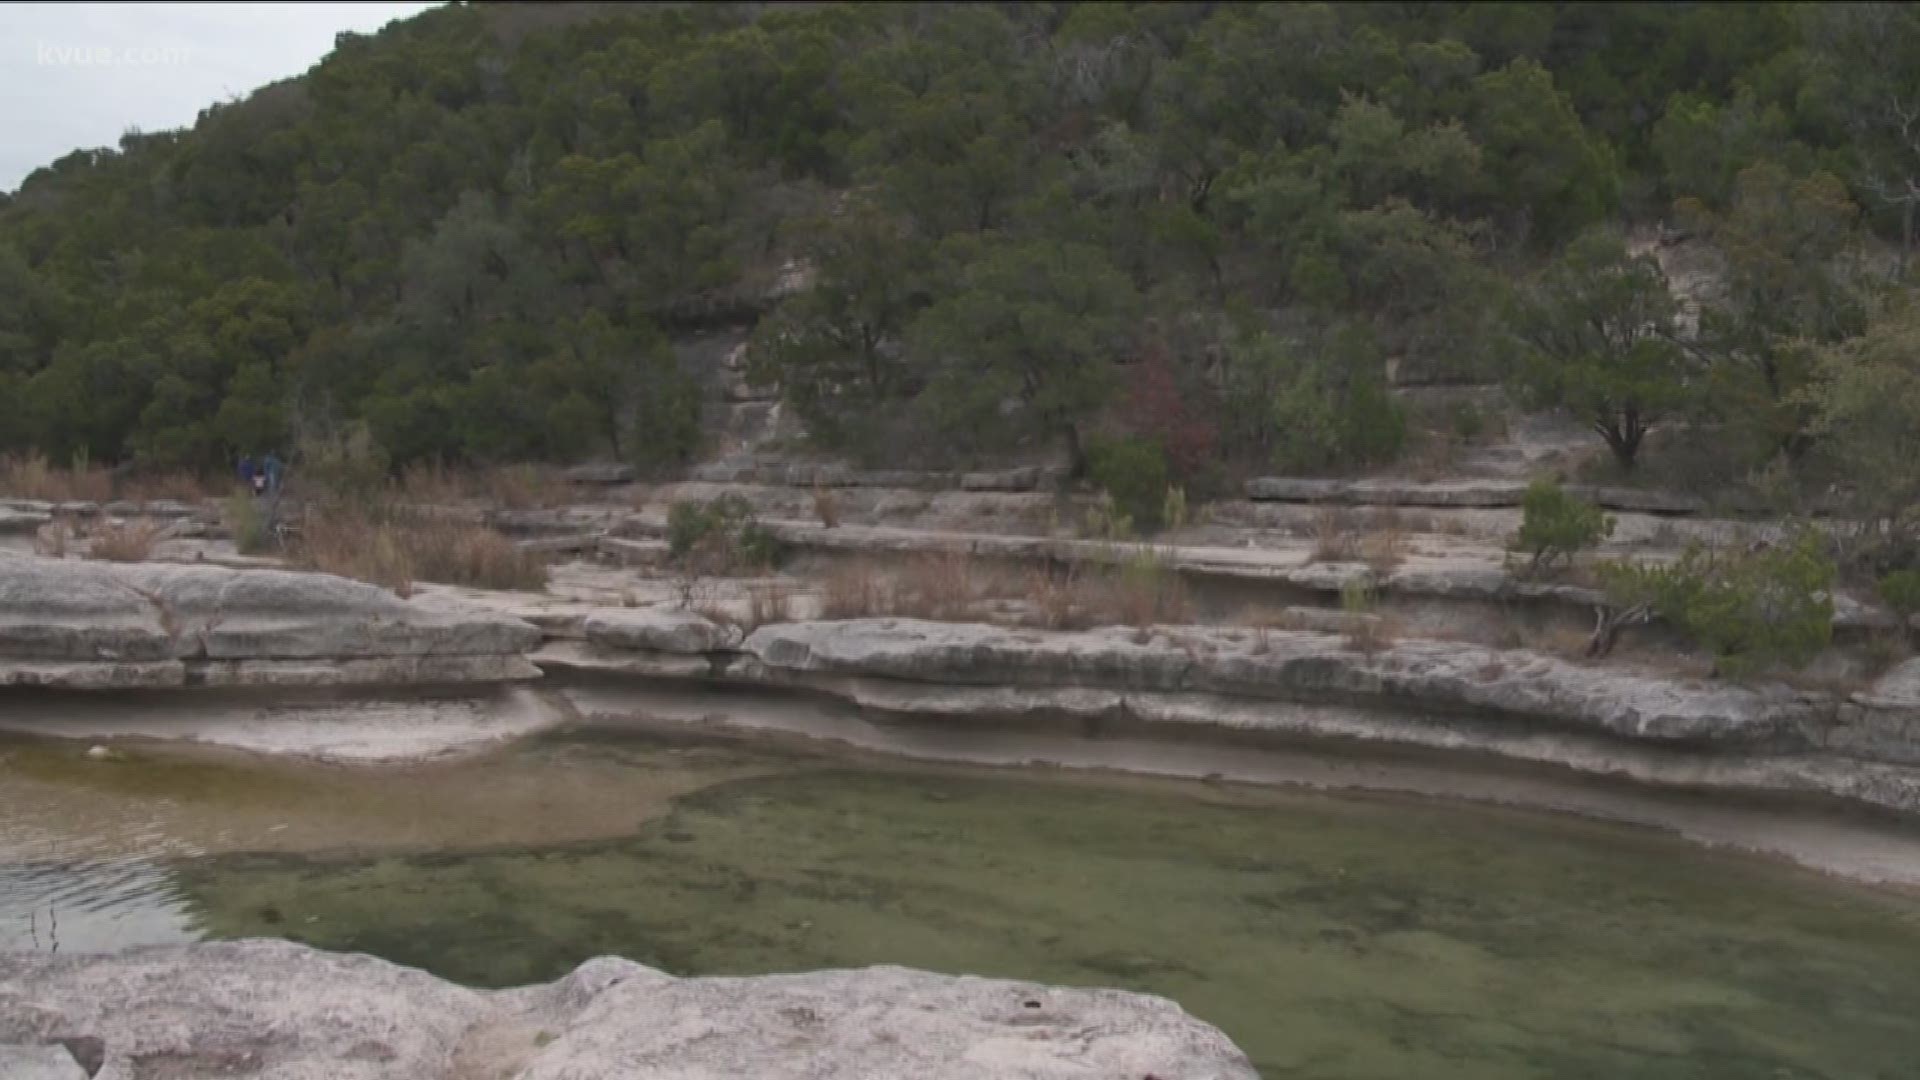 After car break-ins at Bull Creek Greenbelt, the Austin Parks and Recreation Department has installed security cameras to help make parks a little safer.